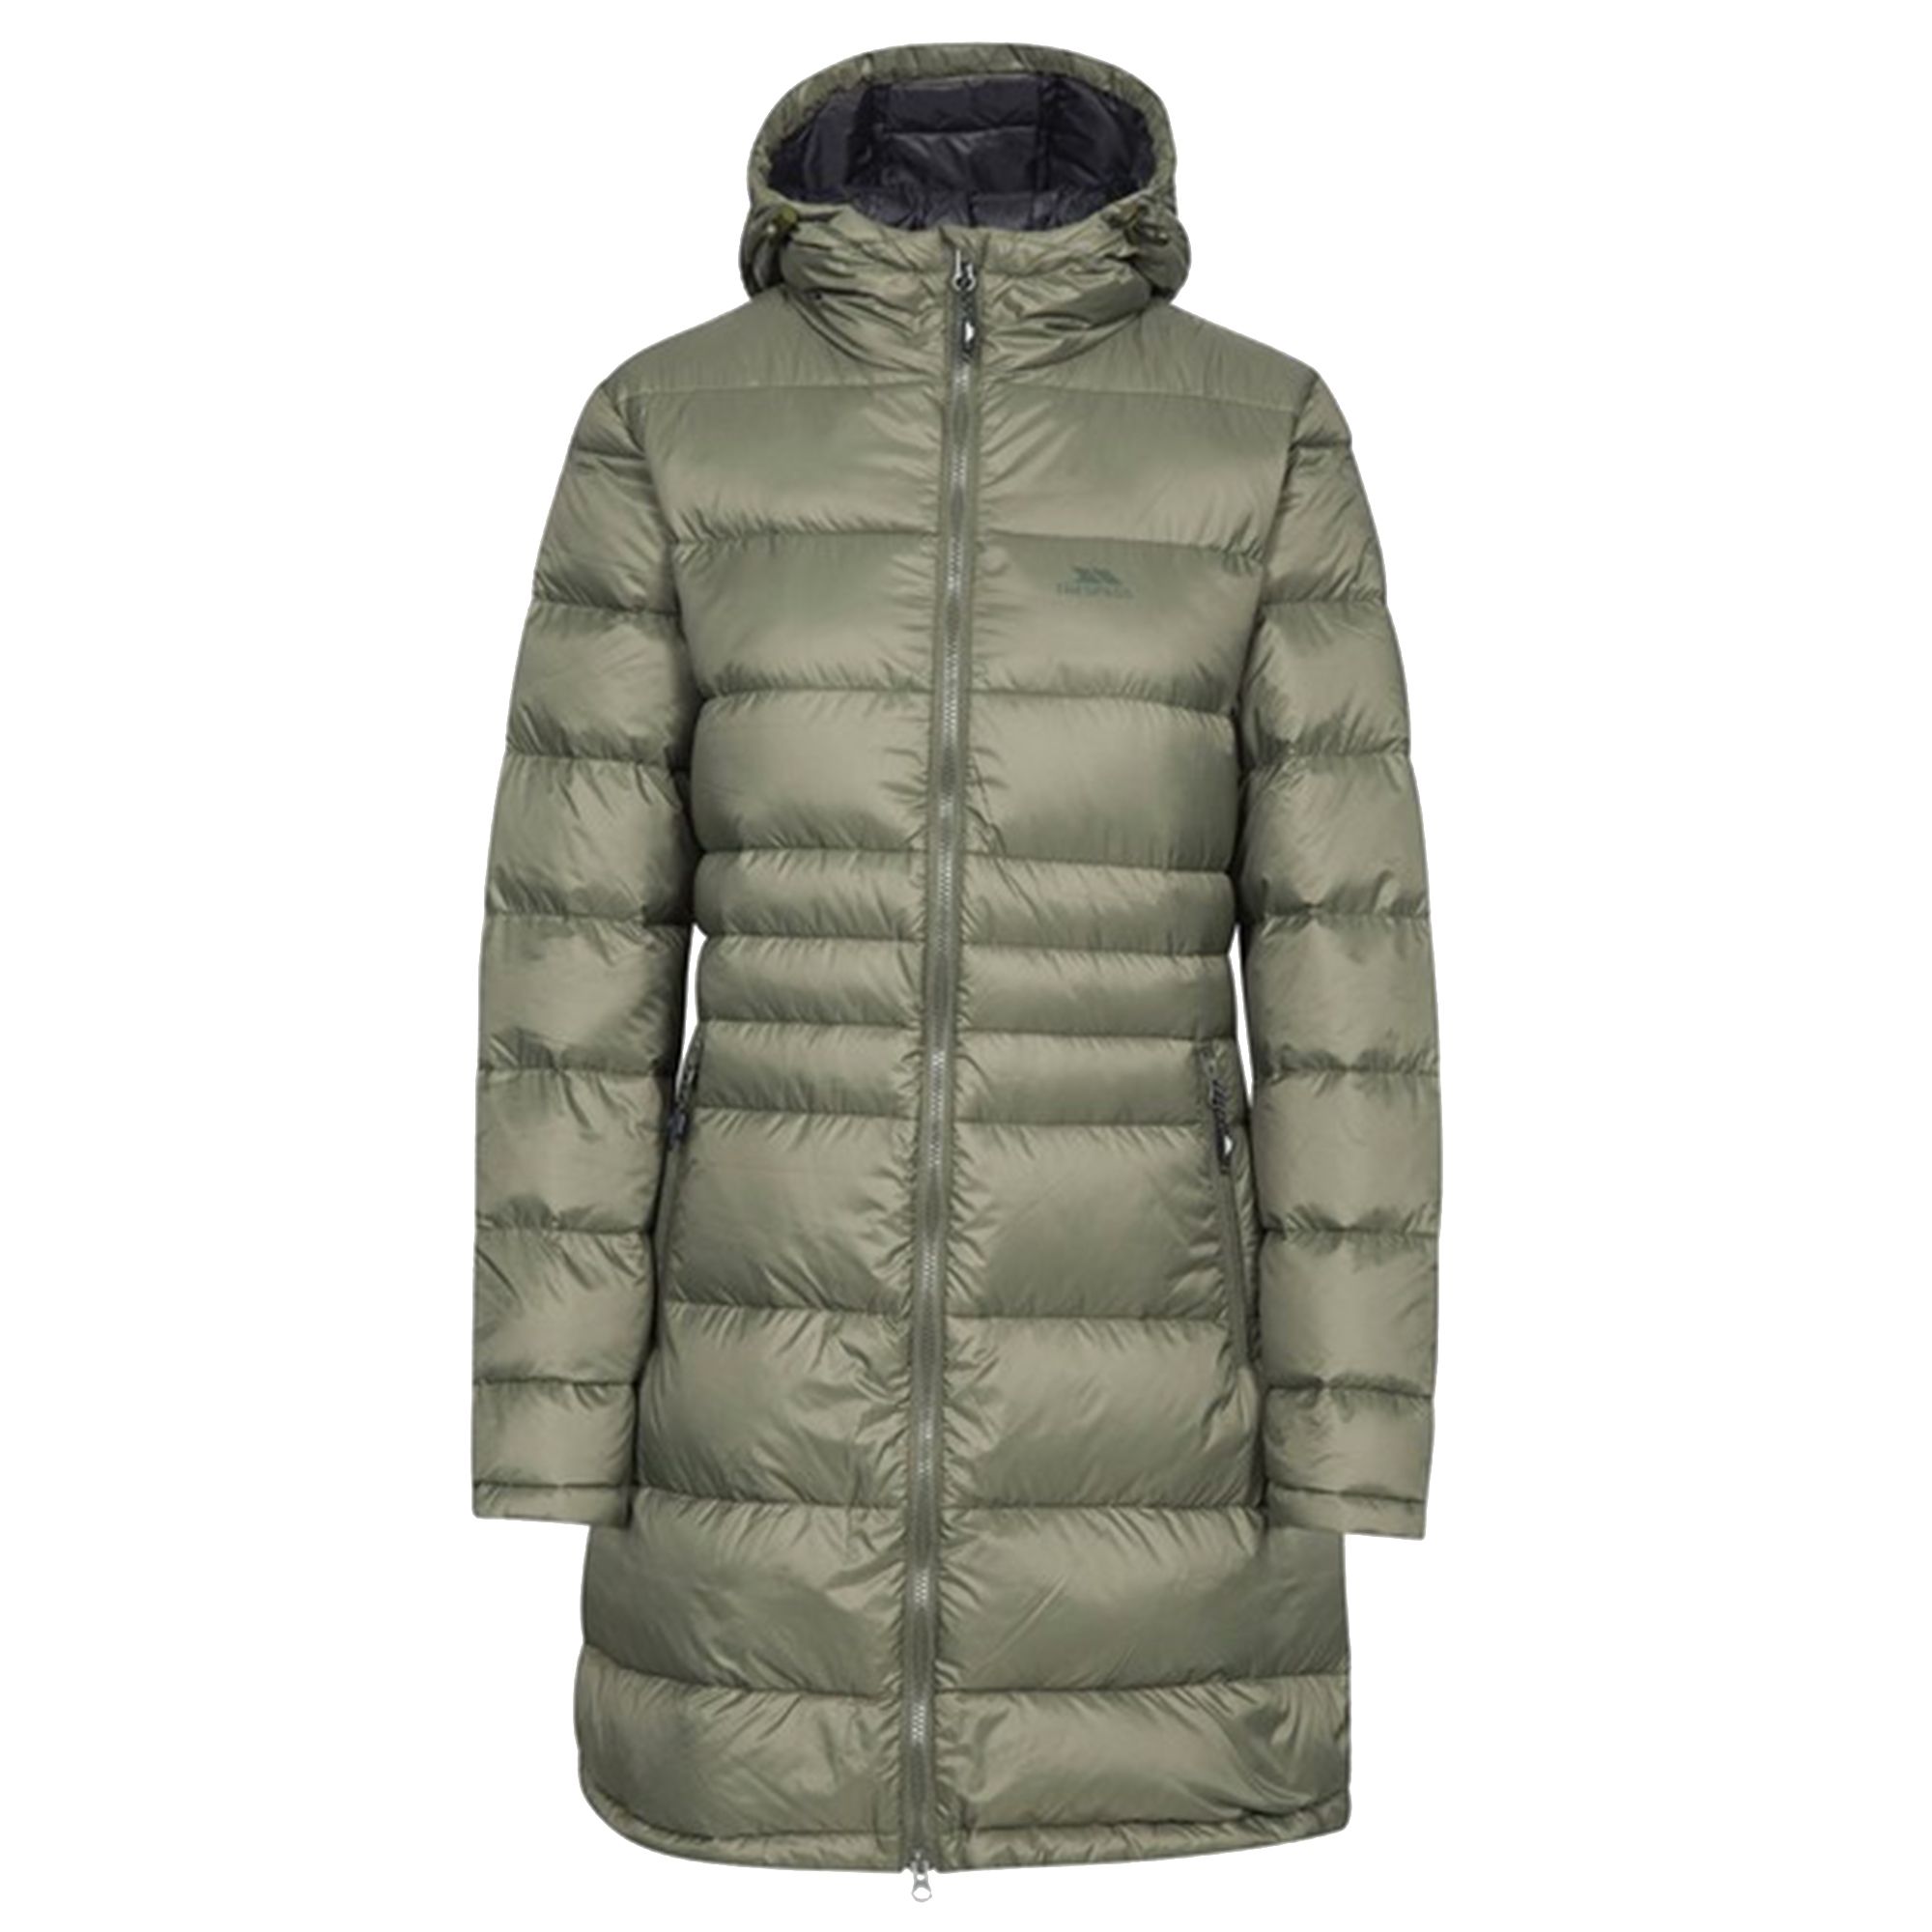 Adjustable grown on hood. 2 zipped pockets. Longer length. 2 way front zipper. Shell: 100% Polyamide, Lining: 100% Polyamide, Filling: 90% Down/10% Feather. Trespass Womens Chest Sizing (approx): XS/8 - 32in/81cm, S/10 - 34in/86cm, M/12 - 36in/91.4cm, L/14 - 38in/96.5cm, XL/16 - 40in/101.5cm, XXL/18 - 42in/106.5cm.